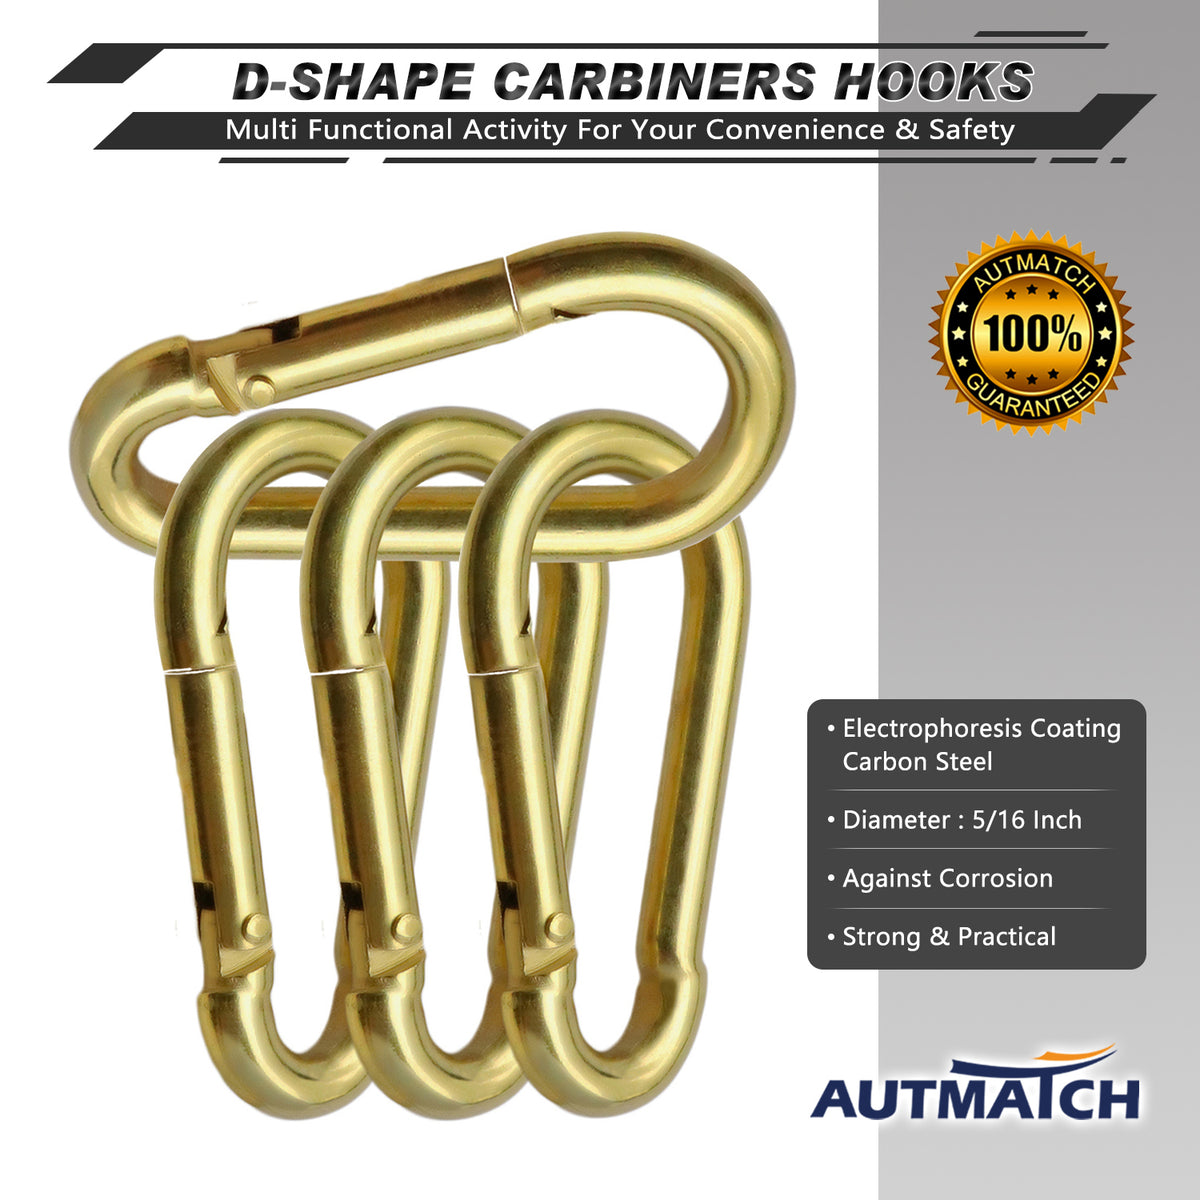 HangSome Gold D-Ring Carabiner Clips